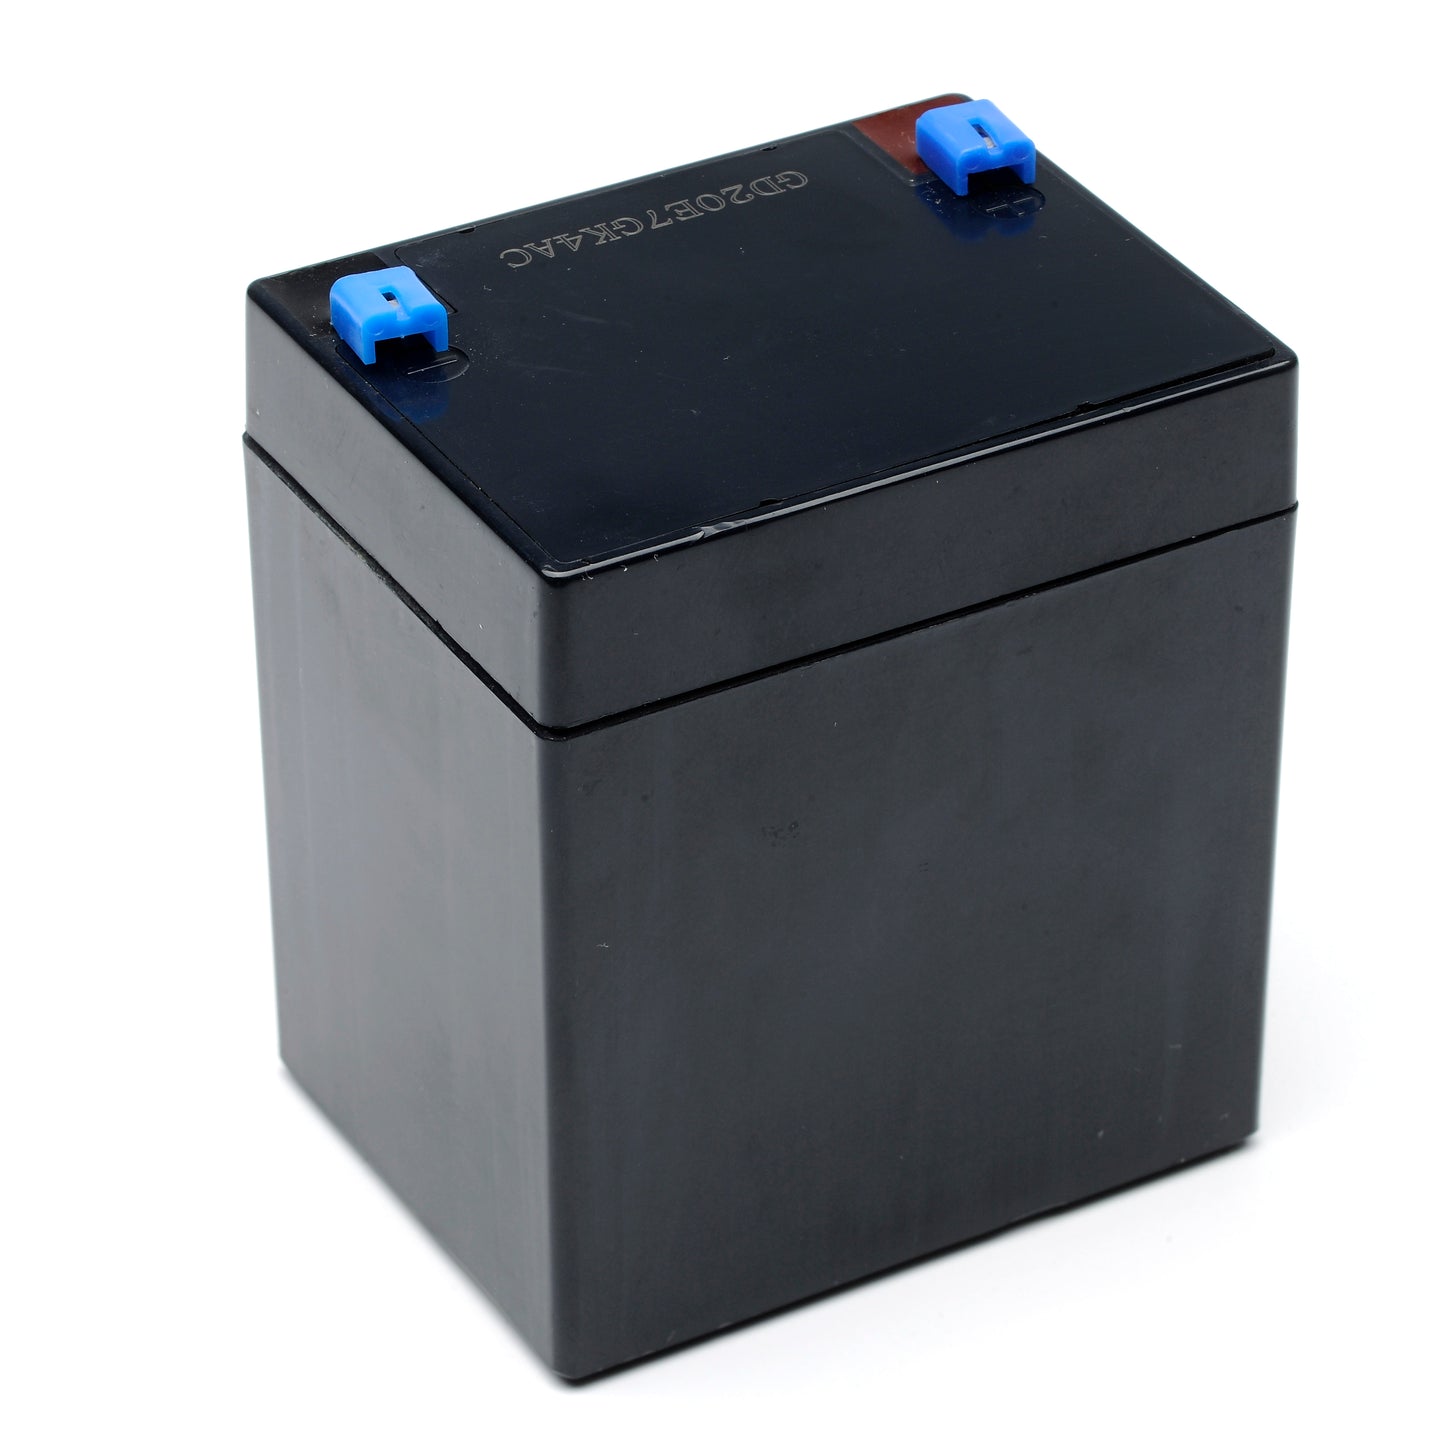 Genie Battery BackUp 12 Volt Replacement battery 111658.0002.S for models 7035 and 7055